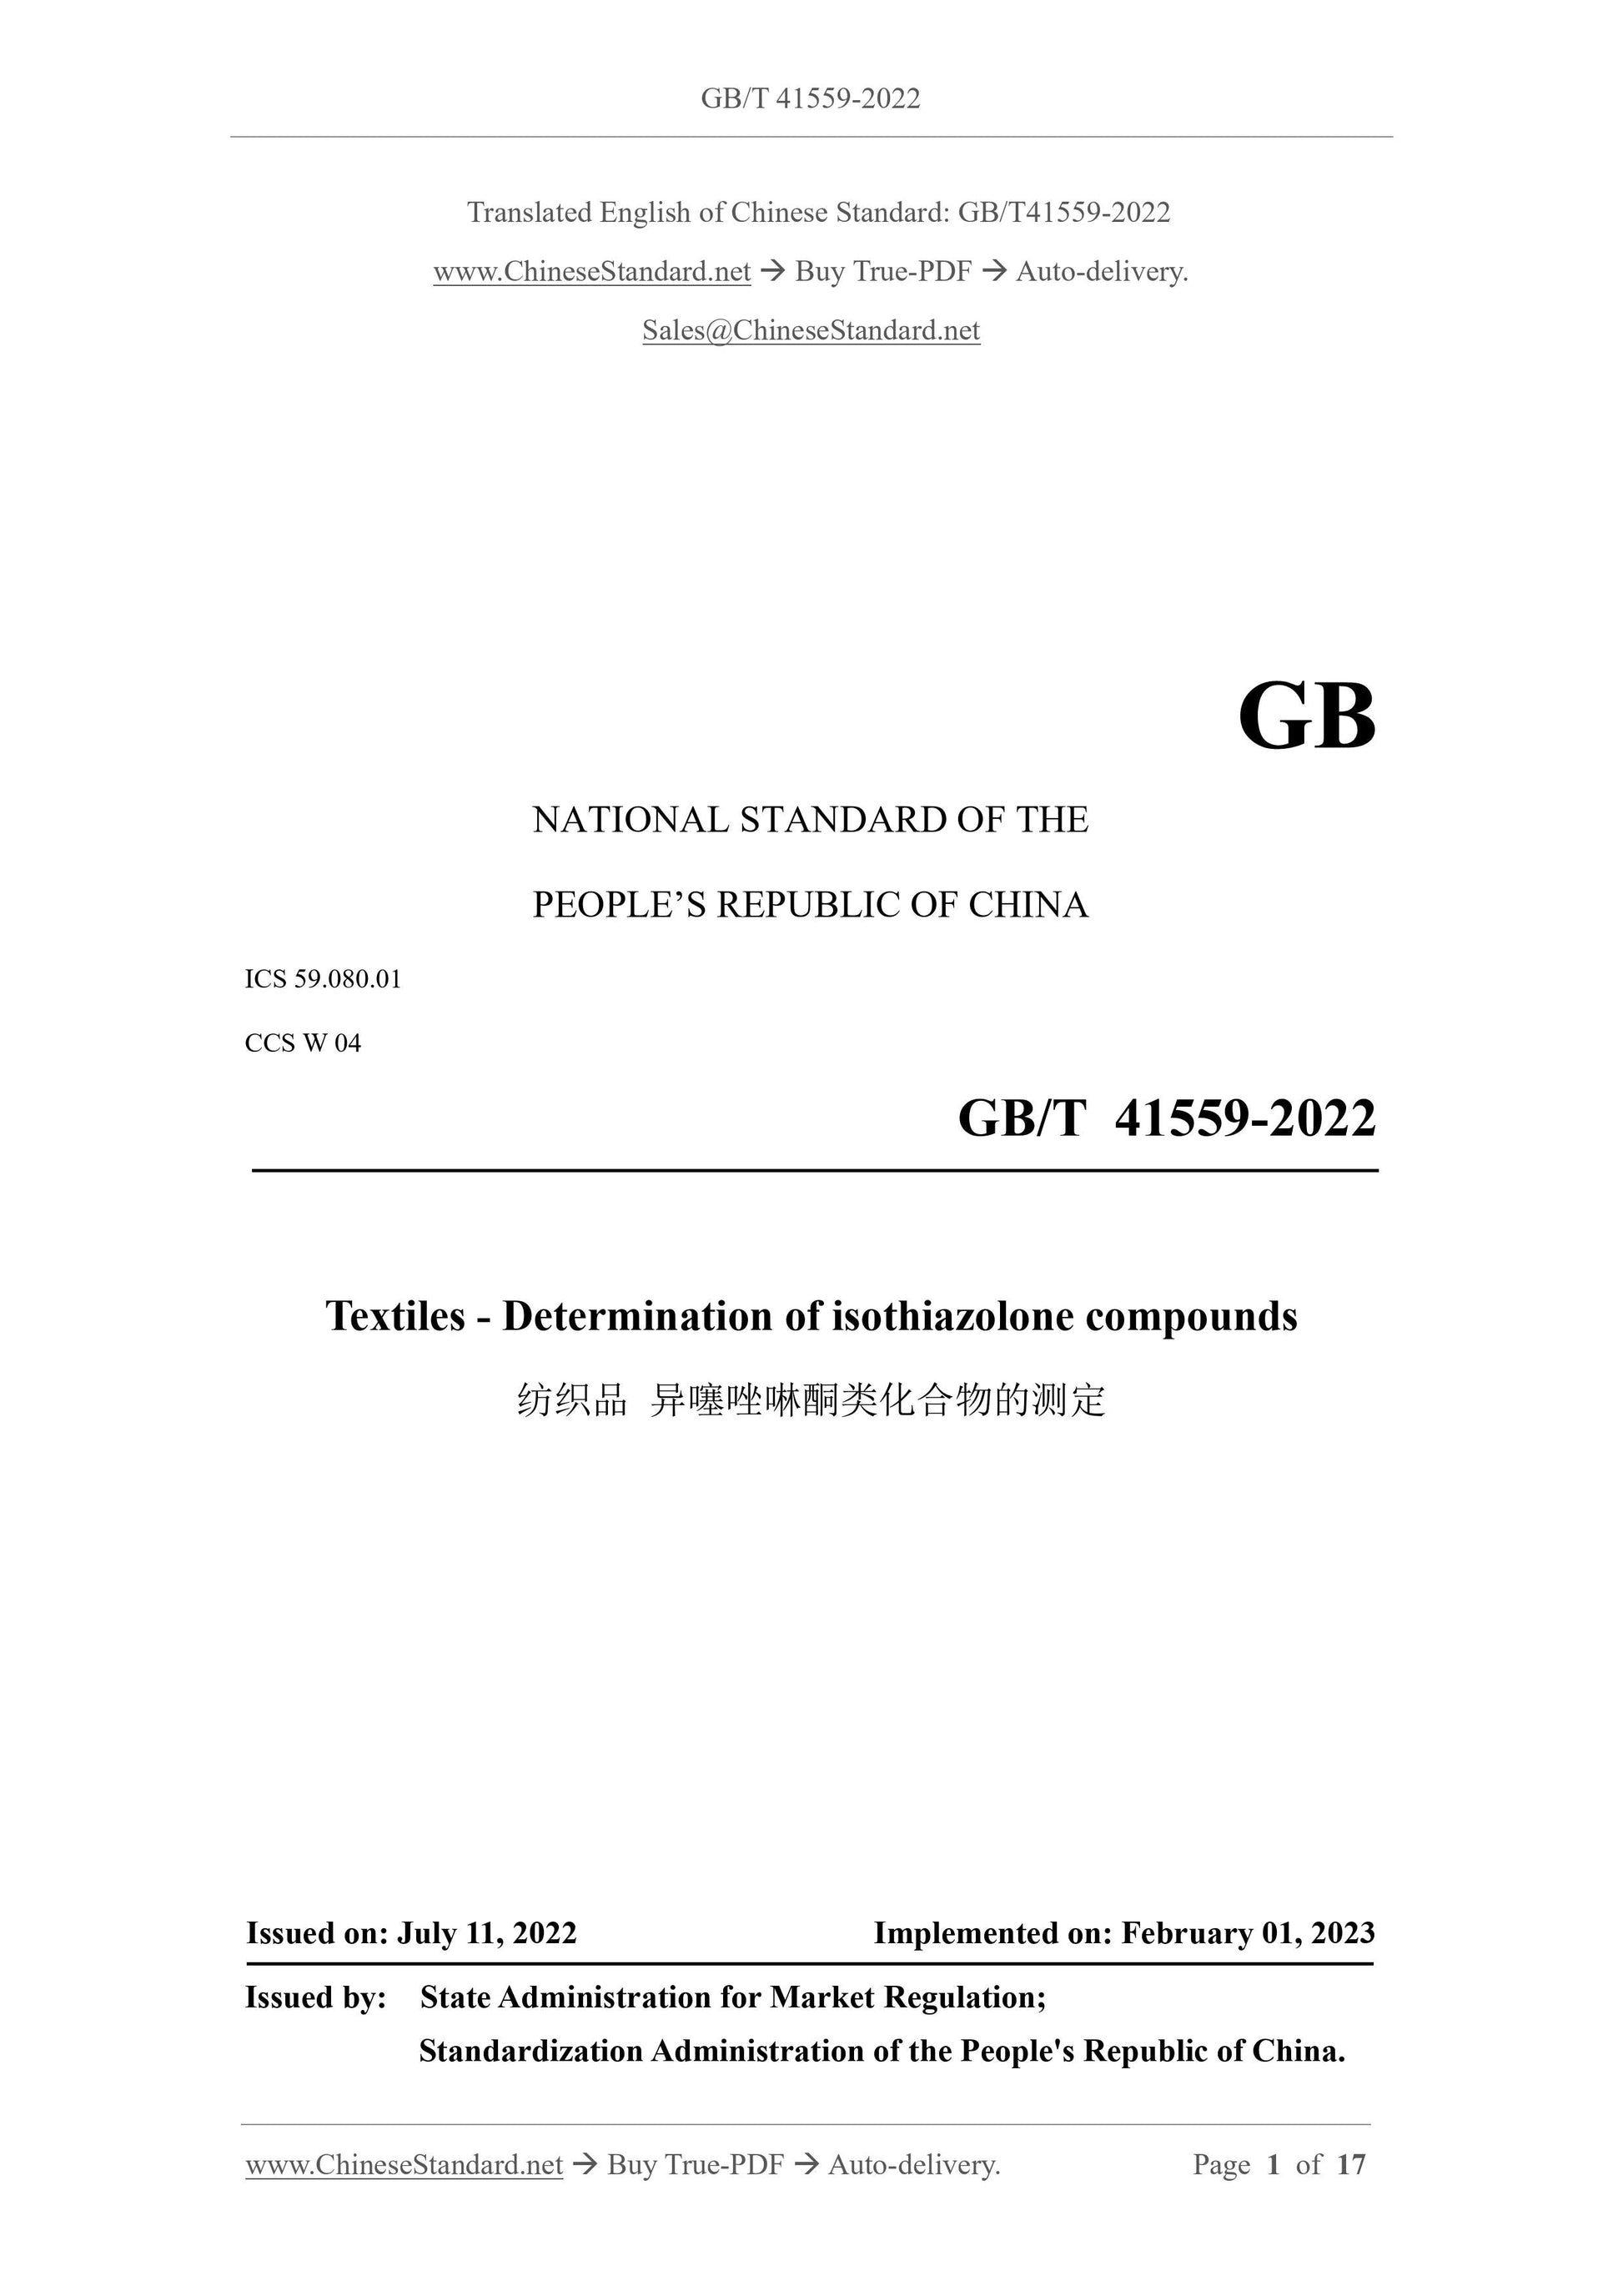 GB/T 41559-2022 Page 1